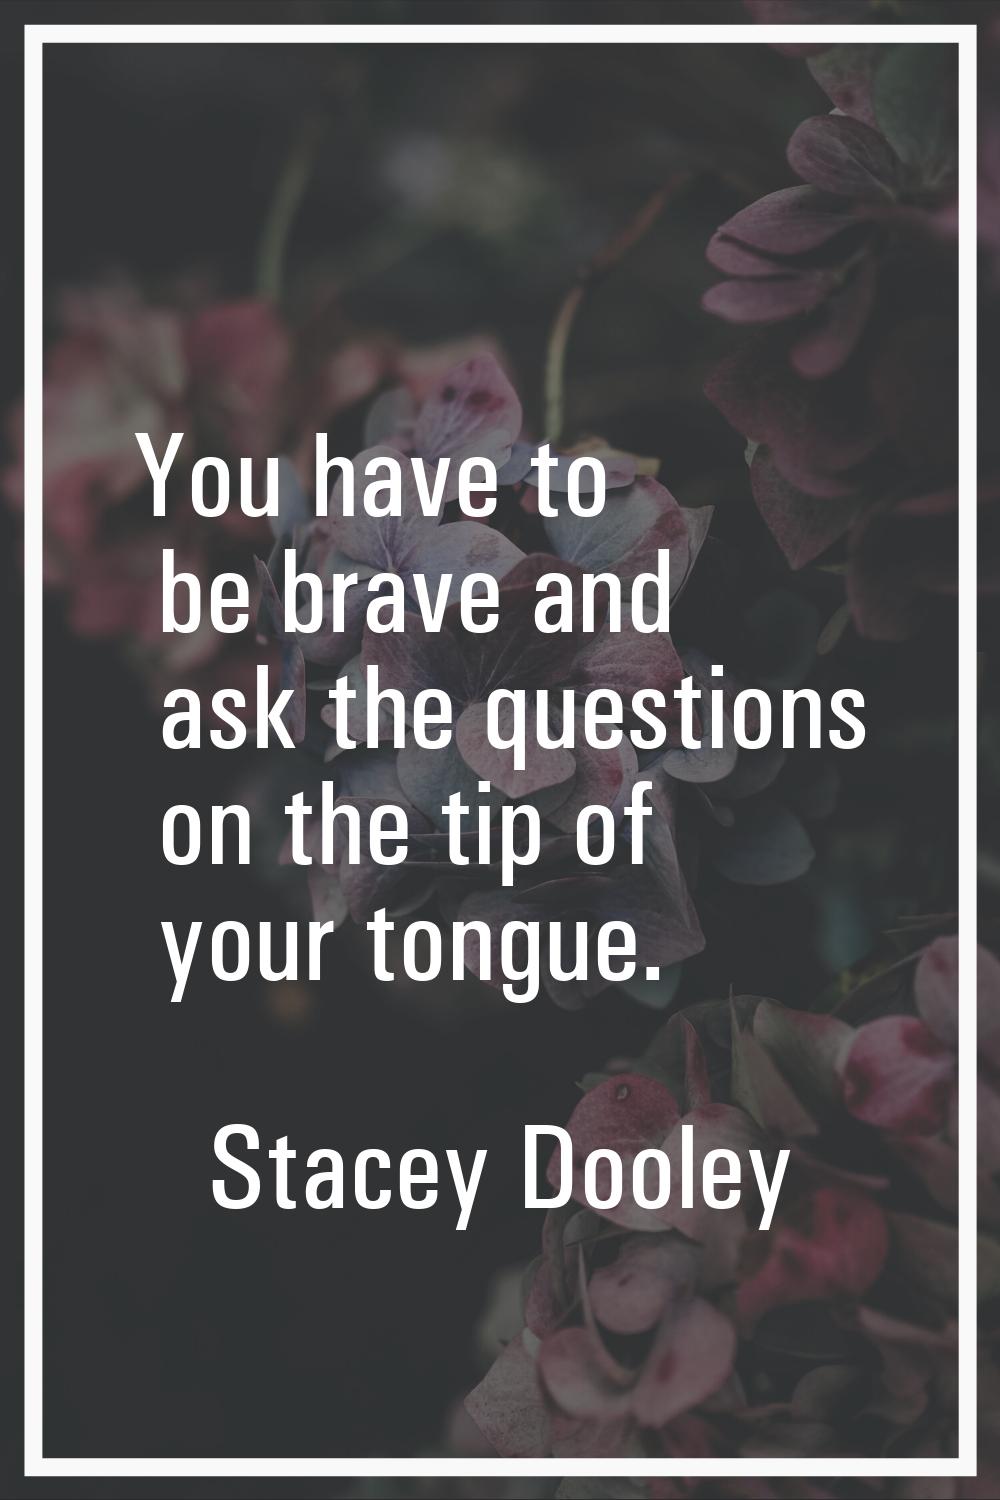 You have to be brave and ask the questions on the tip of your tongue.